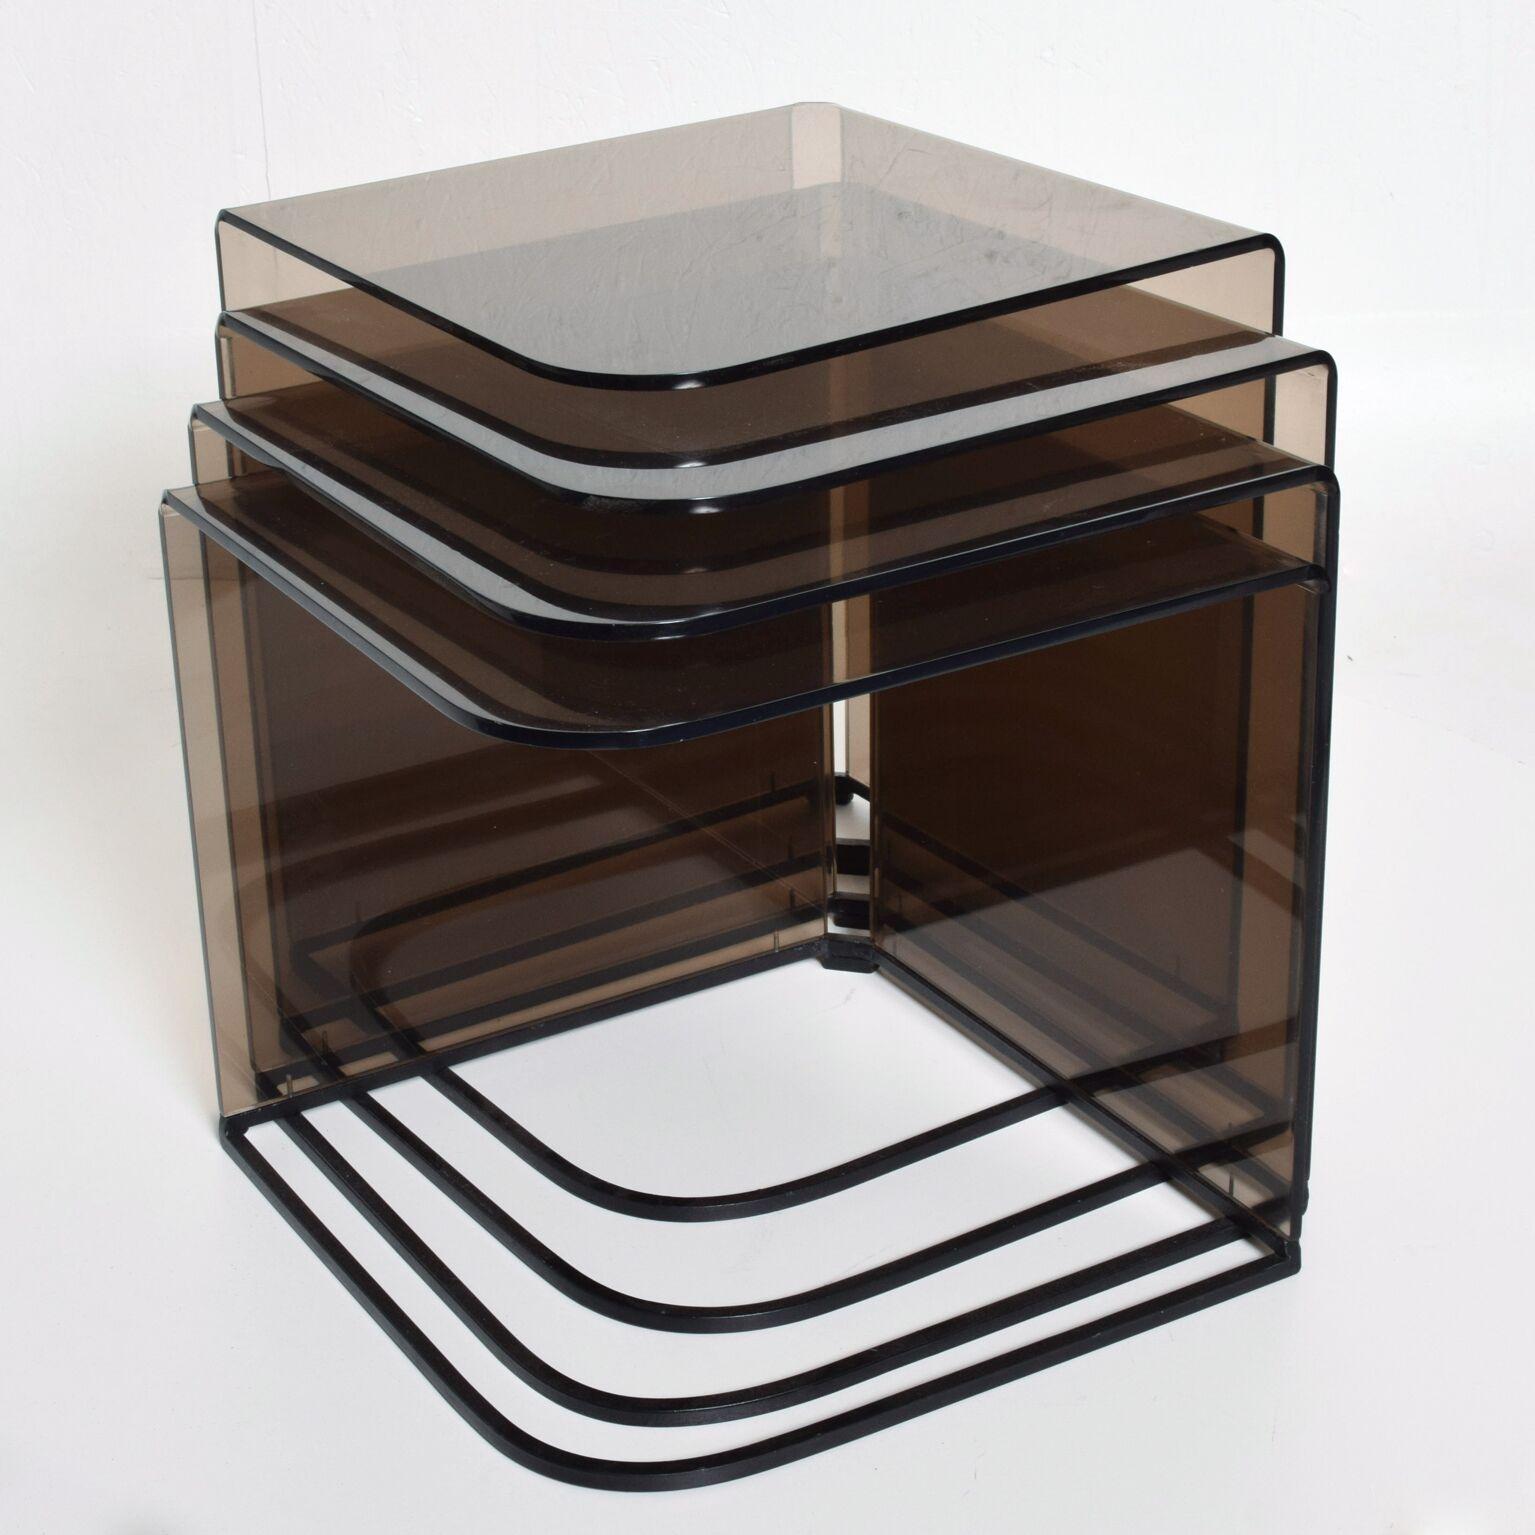 We are pleased to offer you a fantastic set of four (4) nesting tables constructed with the metal frame painted in satin black color and smoke or grey plexiglass. The plexiglass has a sculptural shape bent around corners. Made in the USA, circa